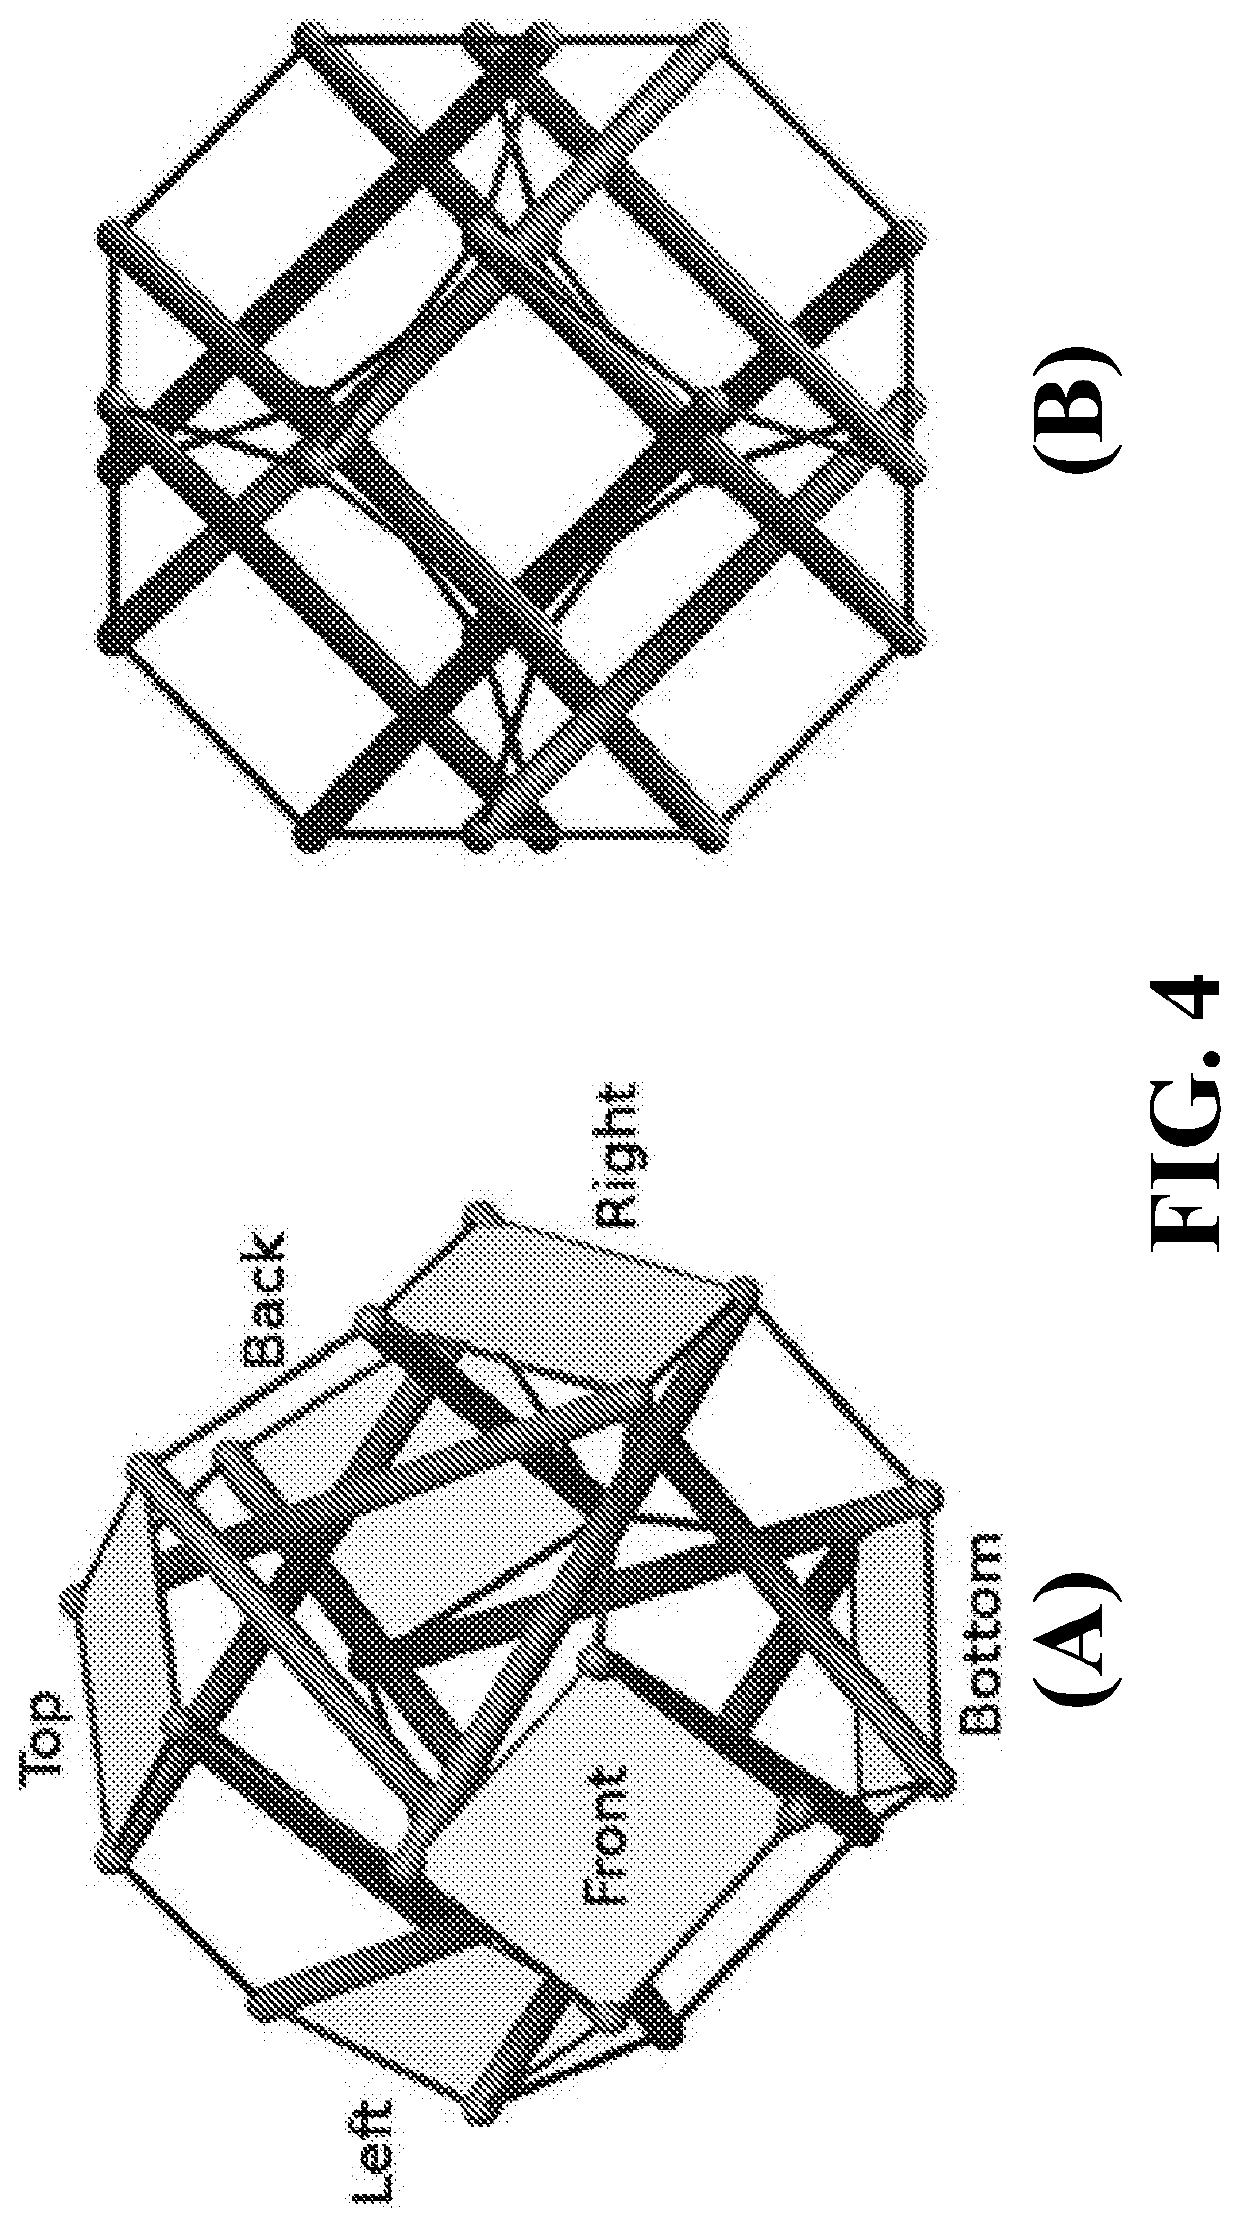 Tensegrity structures and methods of constructing tensegrity structures